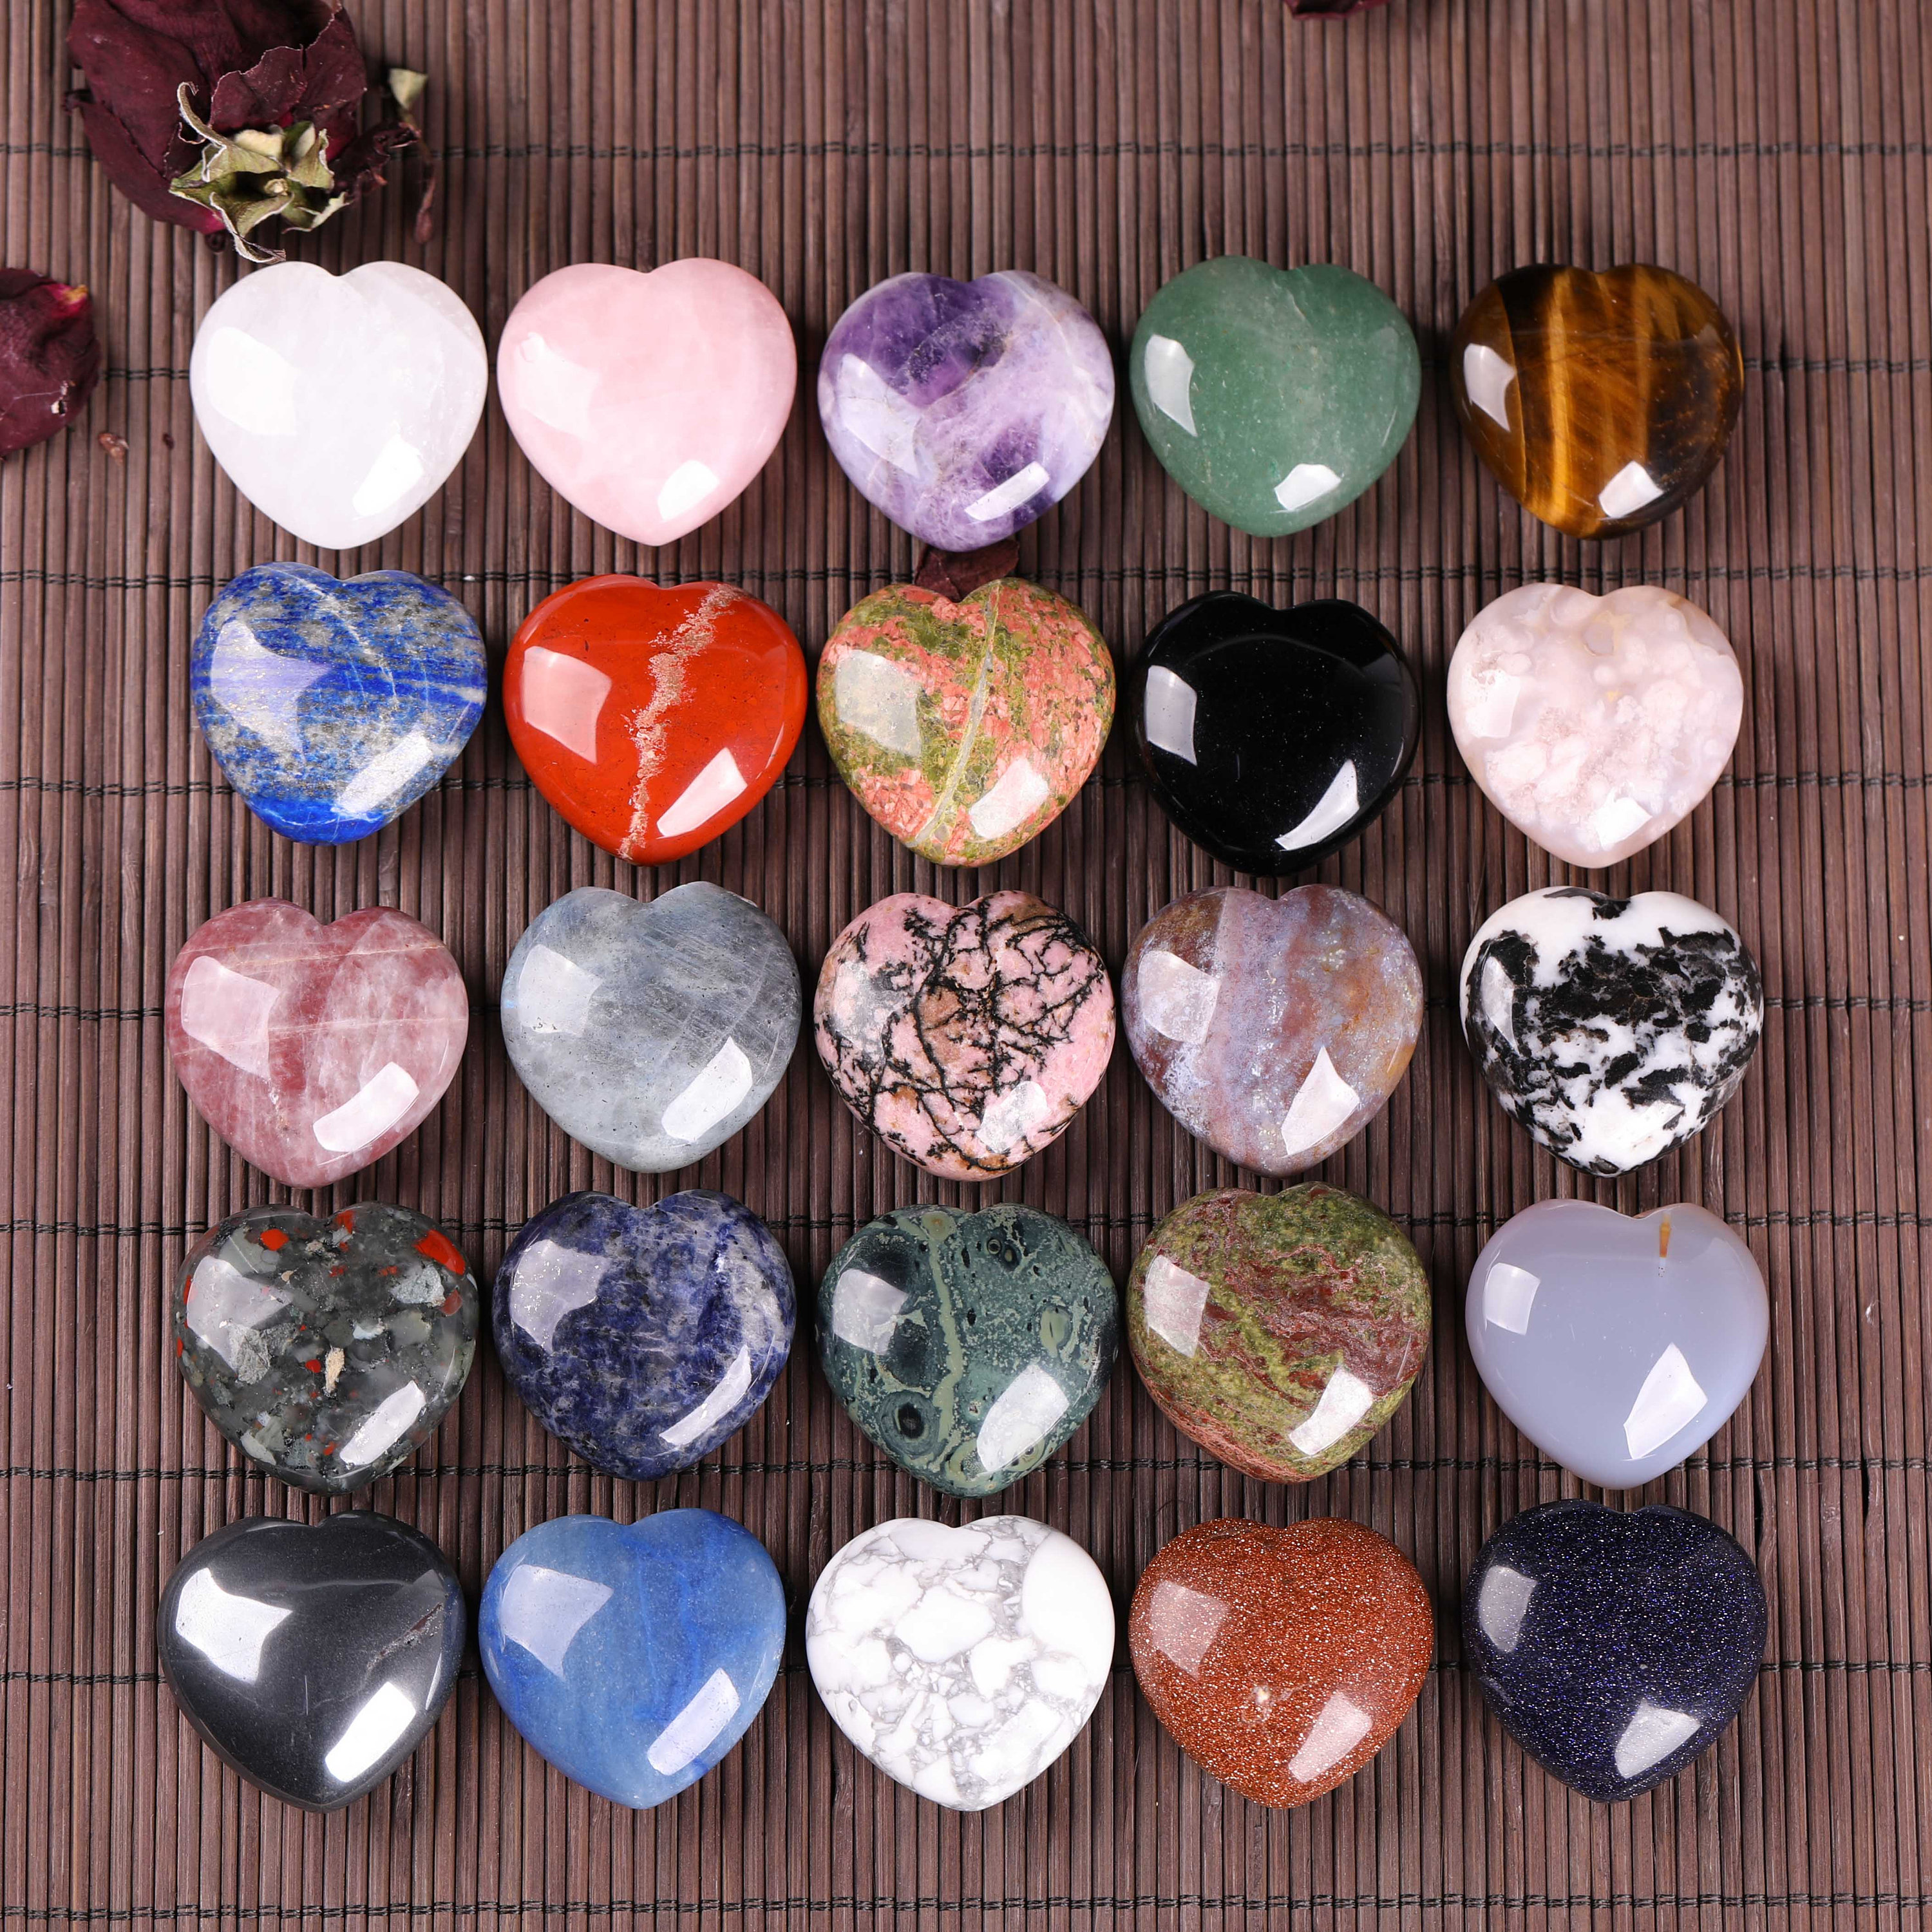 Bulk Heart Shaped Gemstones Mixed Charms Hearts for Jewelry Making Natural Crystal Stones for Crafts-15 pcs Heart-15pcs 